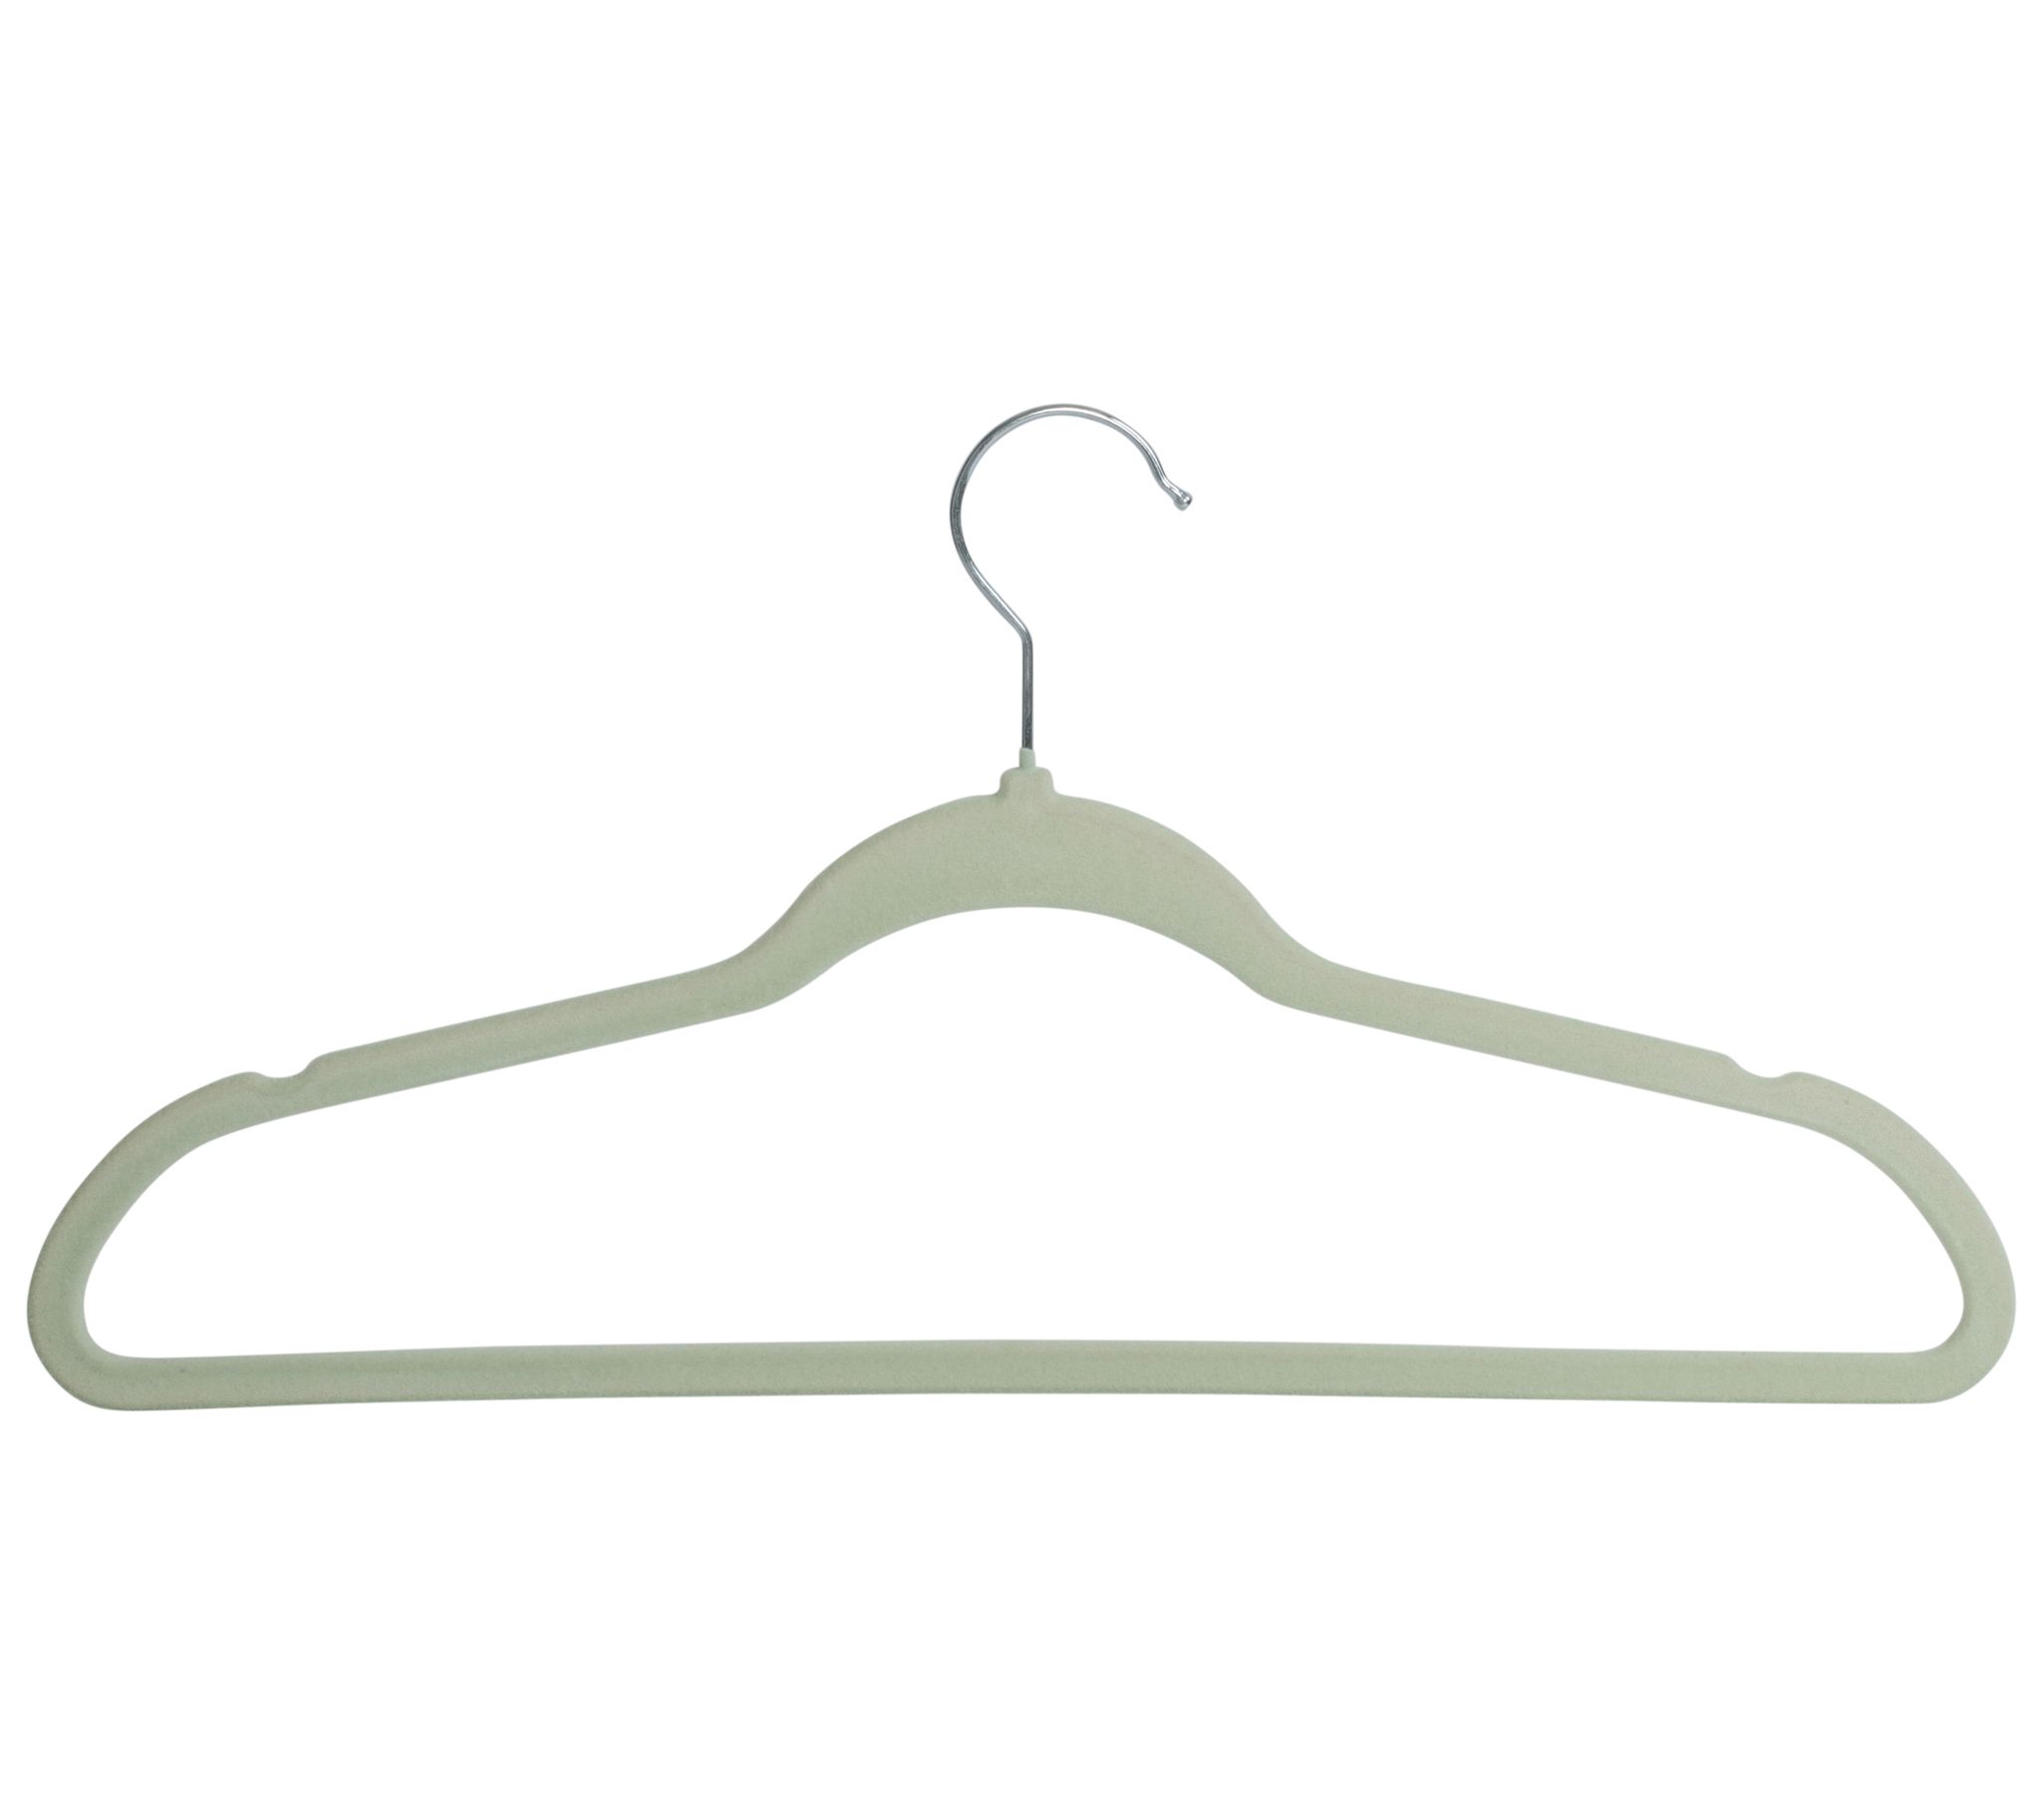 Honey-Can-Do Natural Wood Shirt and Dress Kids Hangers 10-Pack HNG